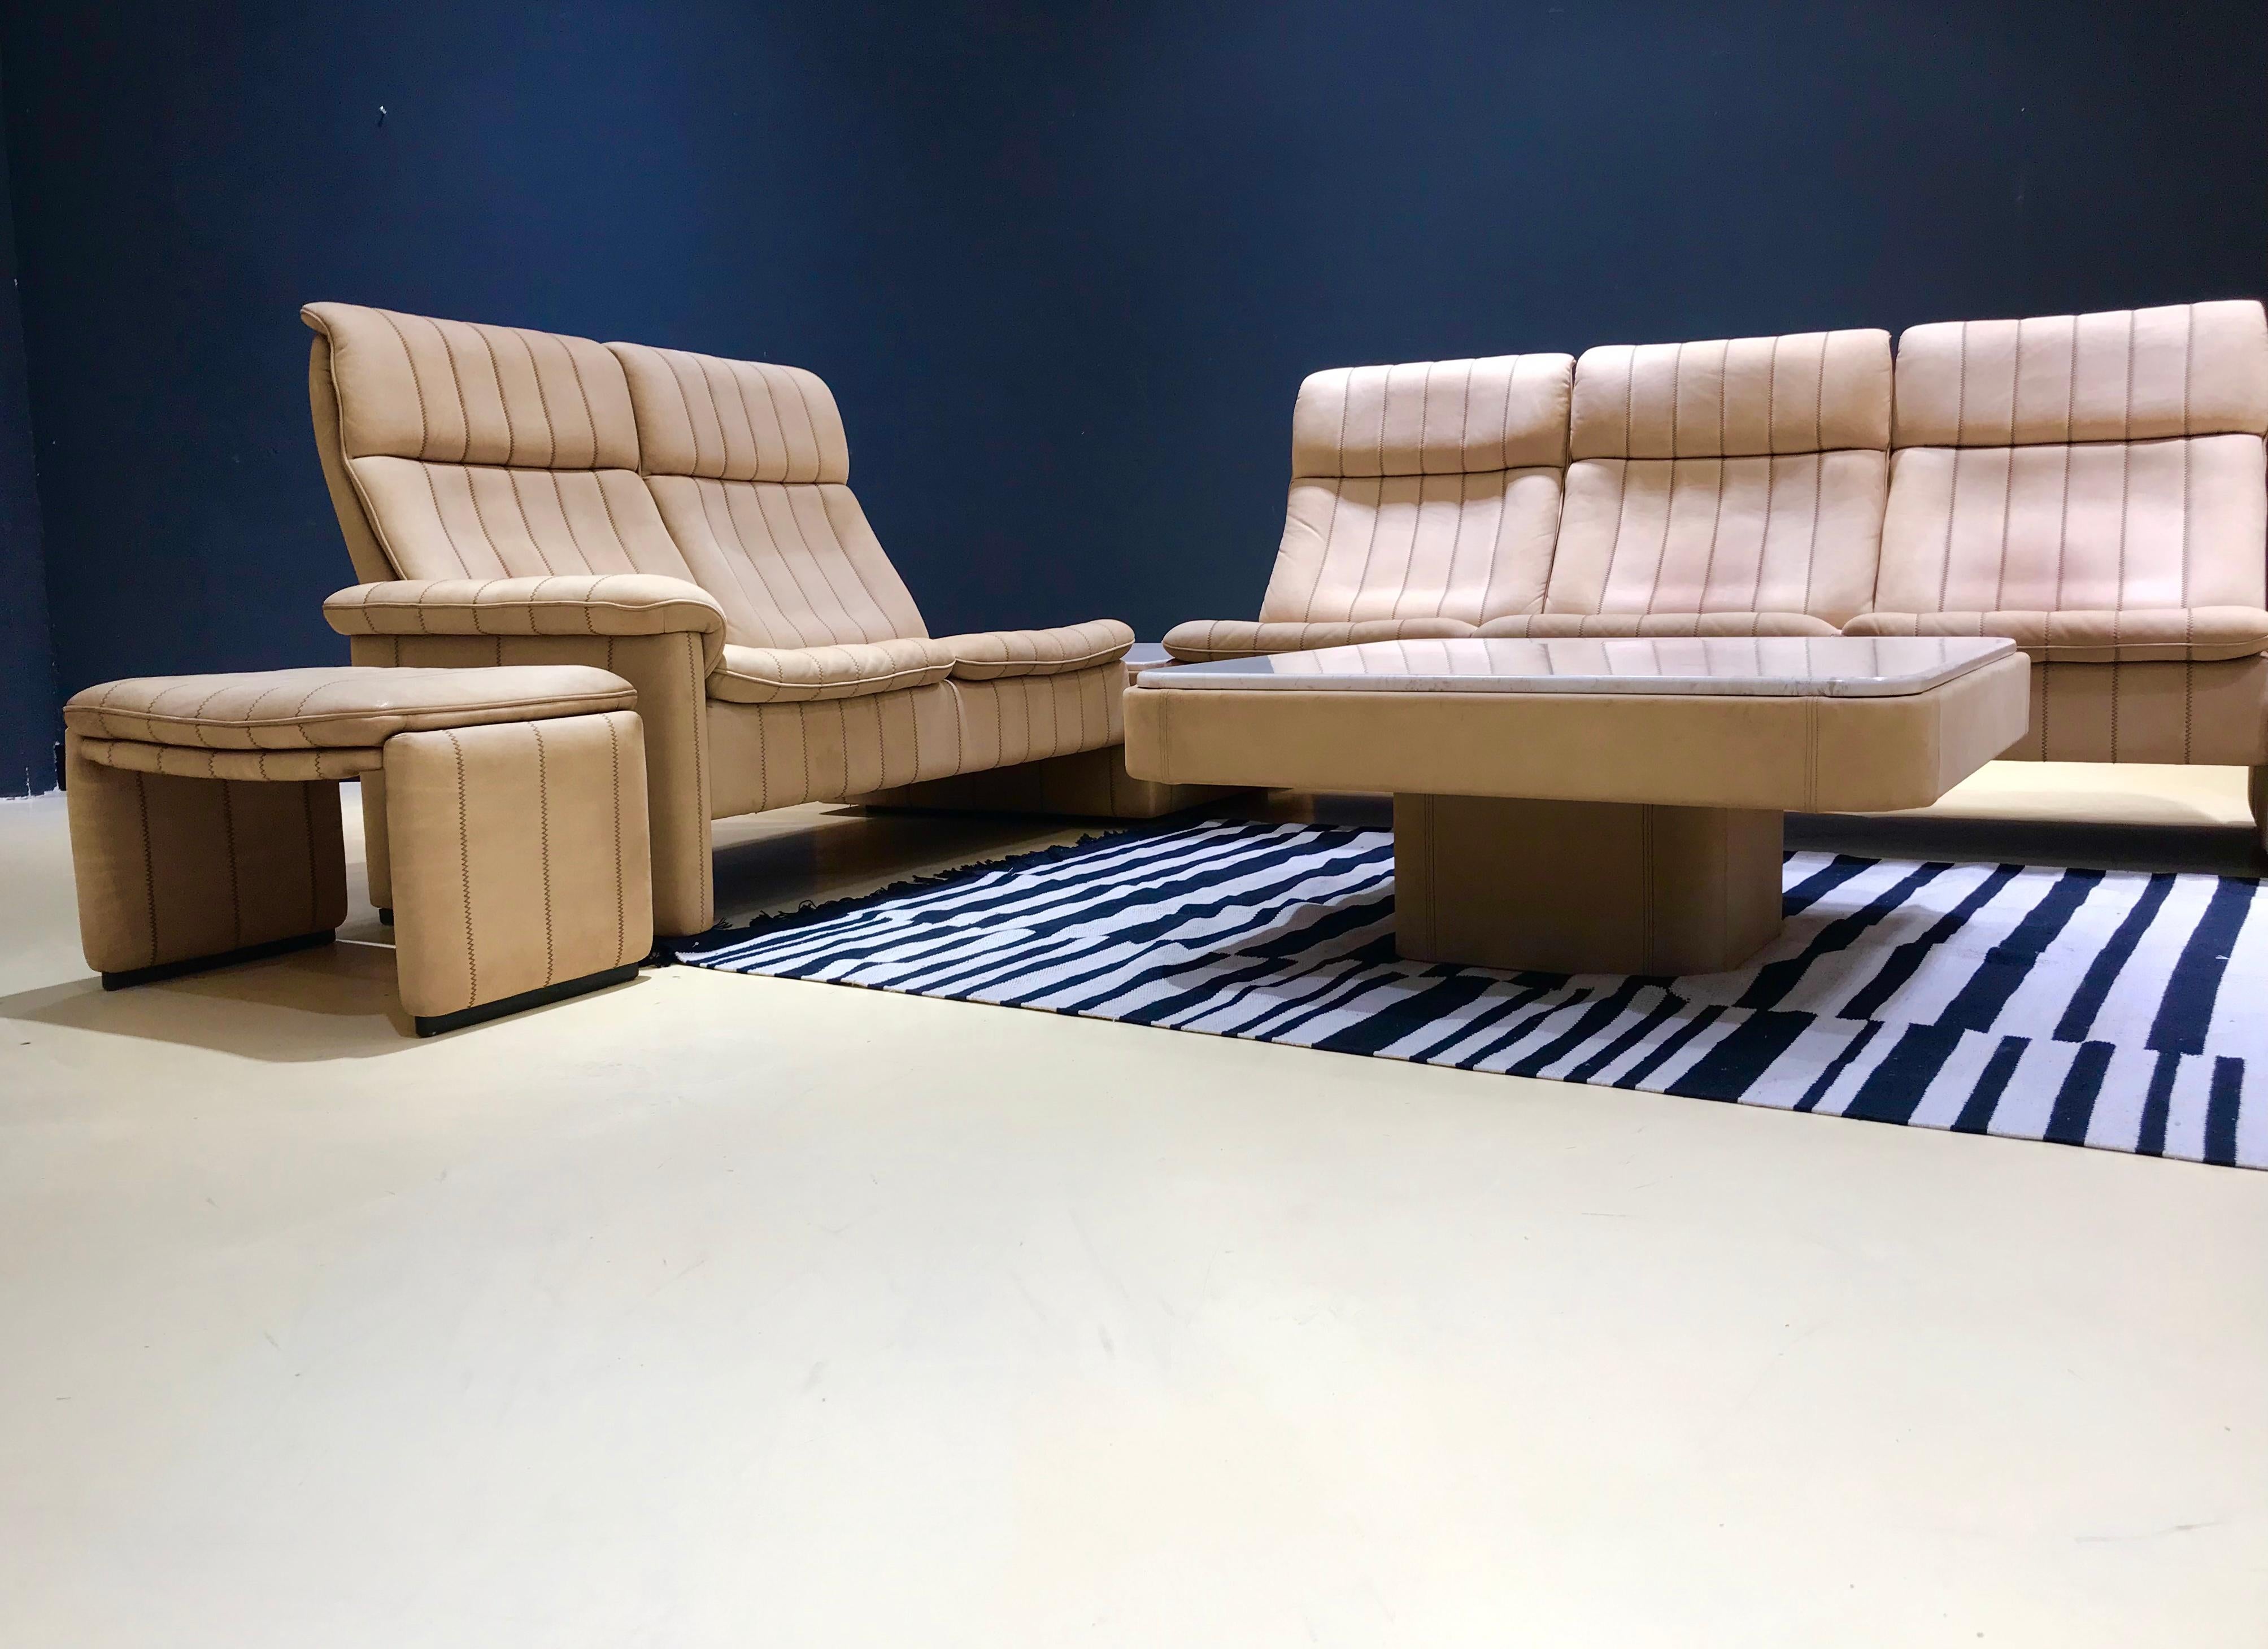 This large vintage livingroom set was manufactured by De Sede by order of a well-to-do German doctor from Germany in the 1970s. The living room set is tailor-made and entirely handmade by De Sede in Switzerland. The set consists of a 2 and a 3-seat.